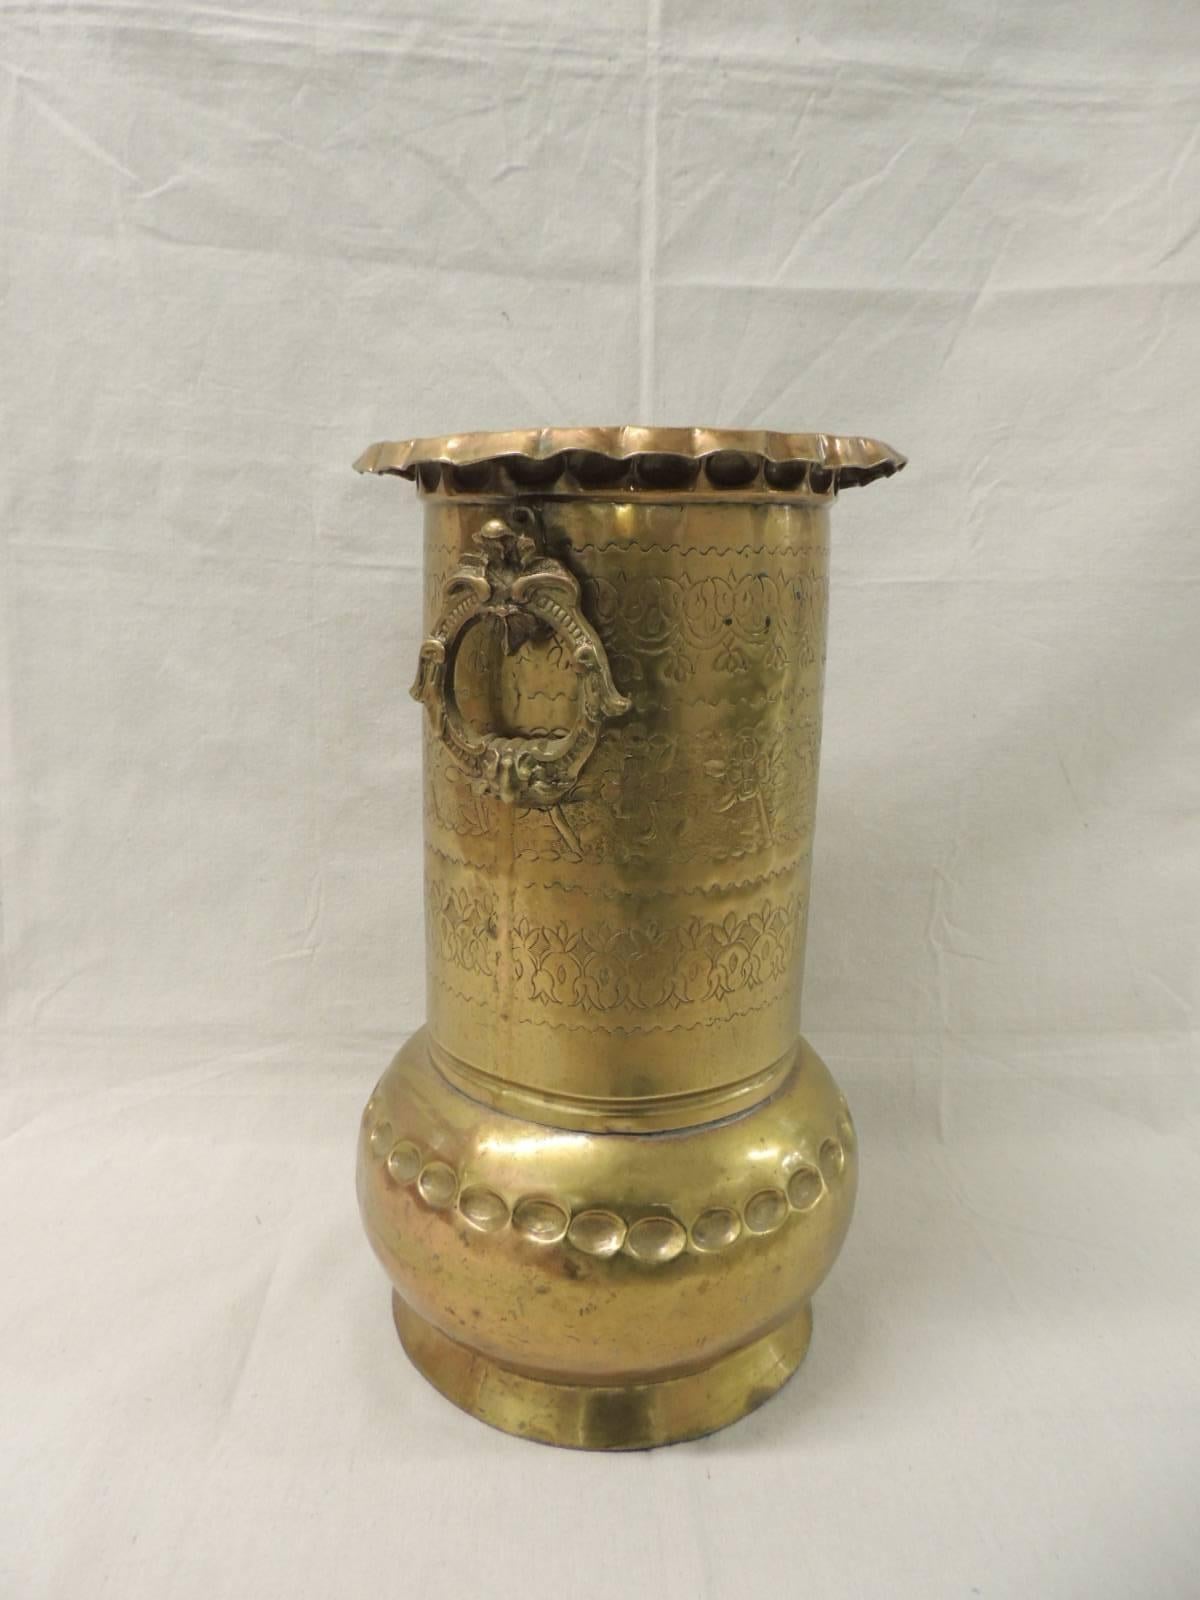 Monumental vintage Persian brass vase.
Monumental vintage Persian vase with hand-hammered brass throughout the piece with two (2) beautiful ornate carved brass handles and a thumb print on the lip at the top. Ideal for tabletop flowers or as an